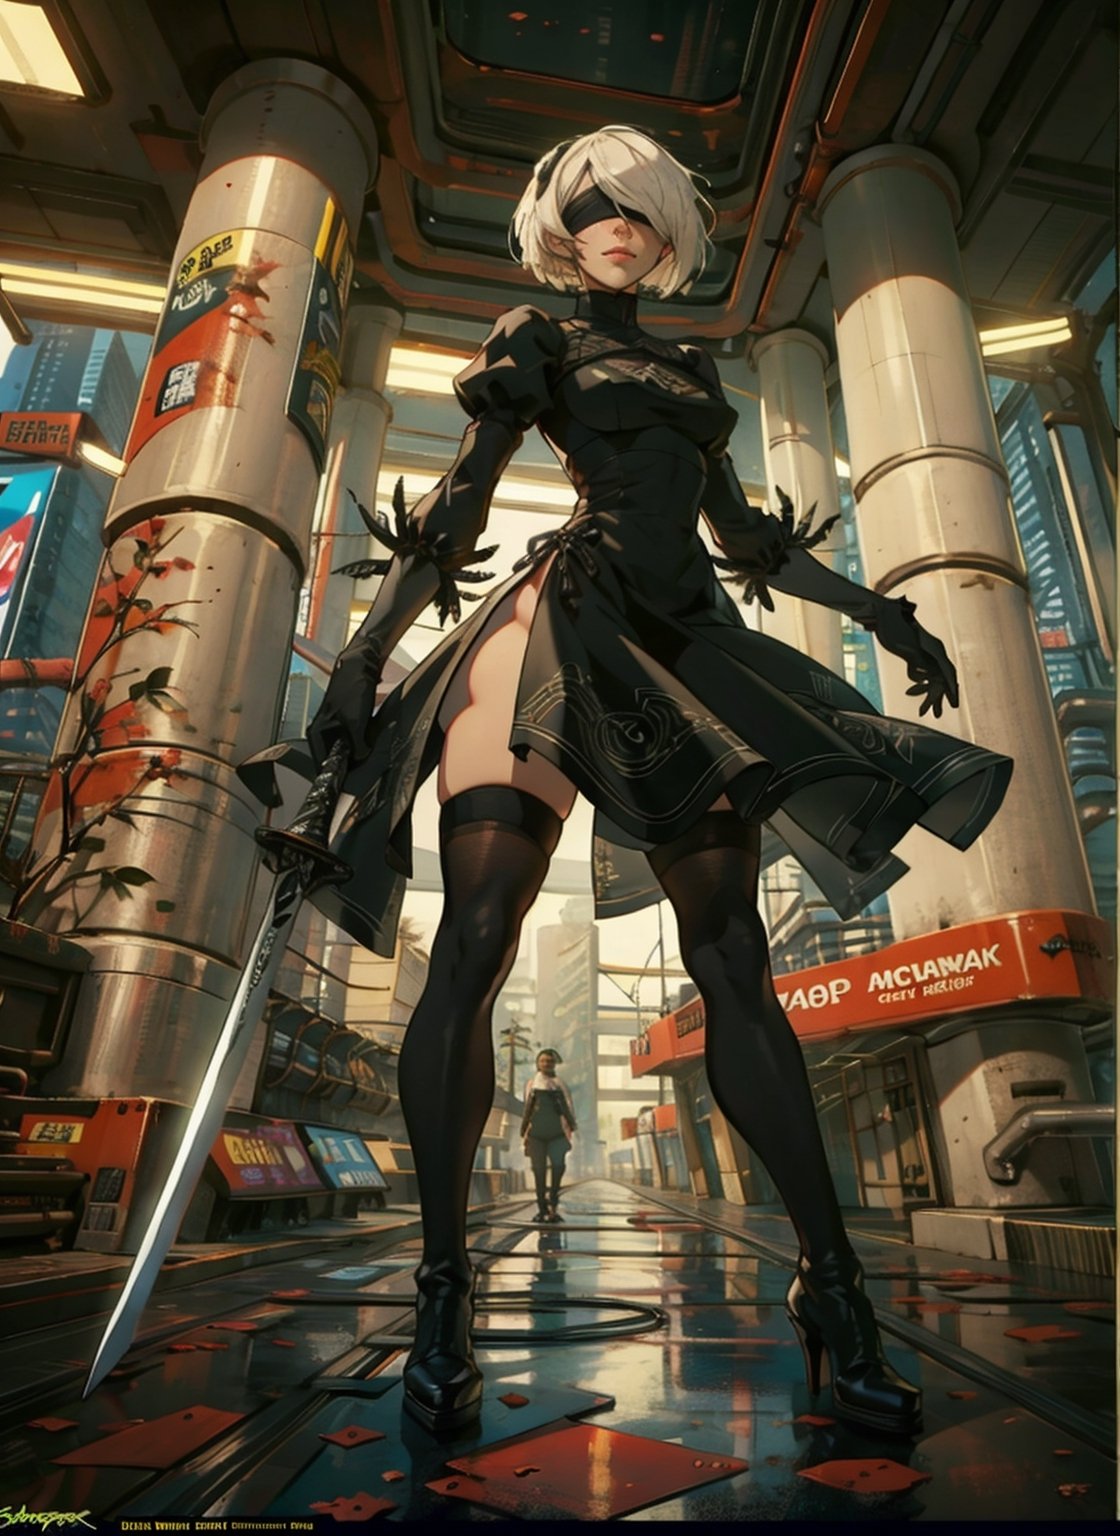 ilustration of badass 2B from Nier Automata,  action pose with her sword, long black boots, cyberpunk city, digital illustration,  comic style,  stunning background,  approaching perfection,  dynamic,  highly detailed,  artstation,  concept art,  smooth,  sharp focus,  illustration,  art by Carne Griffiths and Wadim Kashin,  trending on artstation,  sharp focus,  studio photo,  intricate details,  highly detailed
Negative prompt: EasyNegative
Steps: 23, Sampler: Euler a, CFG scale: 7.0, Seed: 1219203566, Size: 512x768, Model: 600, Denoising strength: 0.25, Clip skip: 2, ENSD: 31337, TI hashes: easynegative, Version: v1.6.0.21-2-g18ca1f3
Used Embeddings: easynegative,n_2b,yorha no. 2 type b,blindfold,fate/stay background,yofukashi background